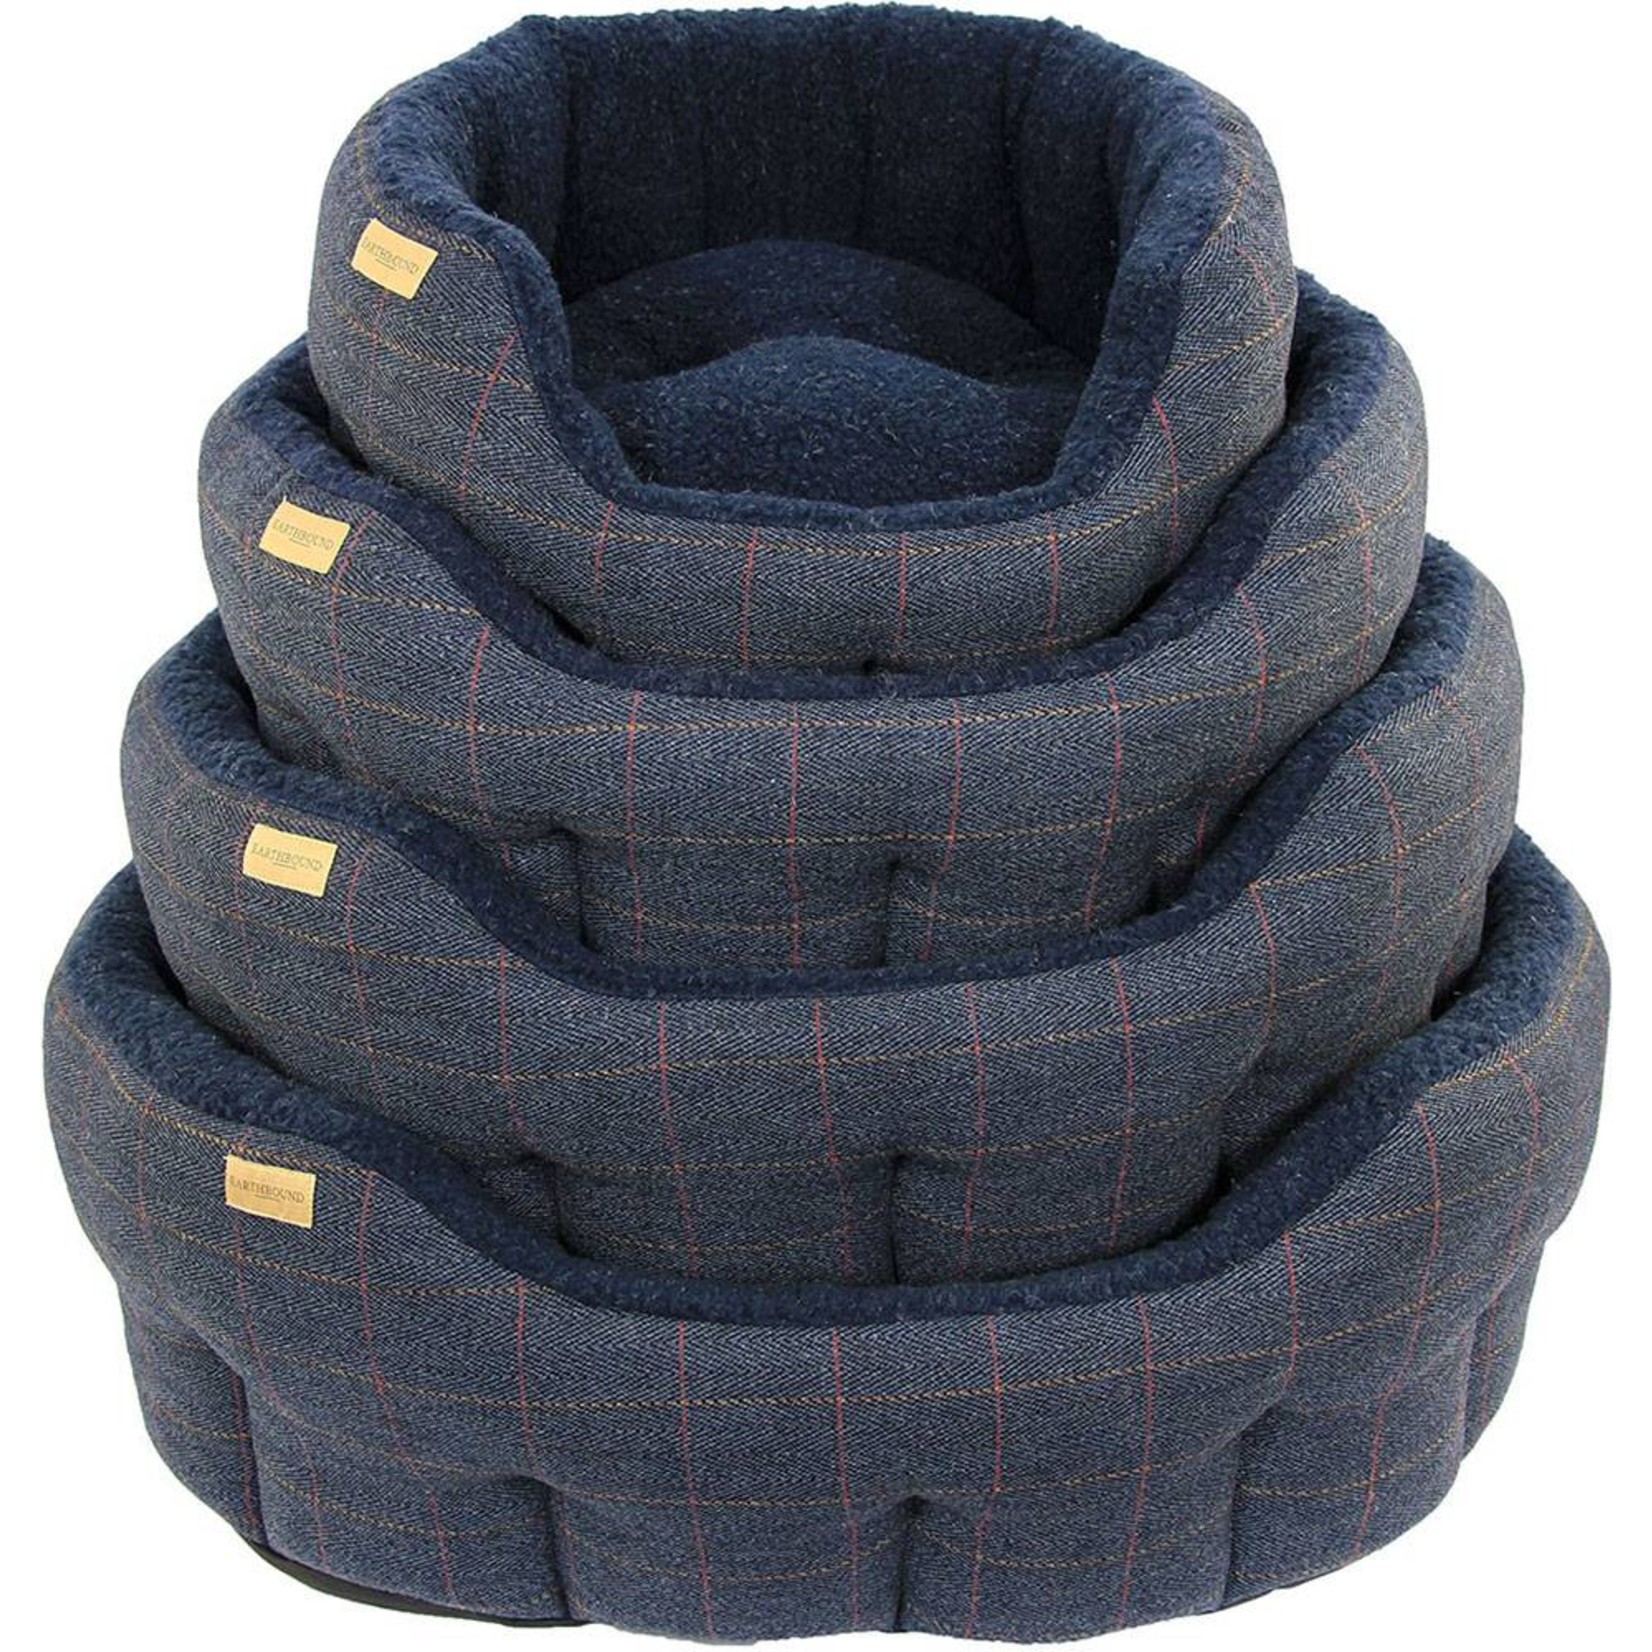 Earthbound Traditional Tweed Dog Bed, Navy